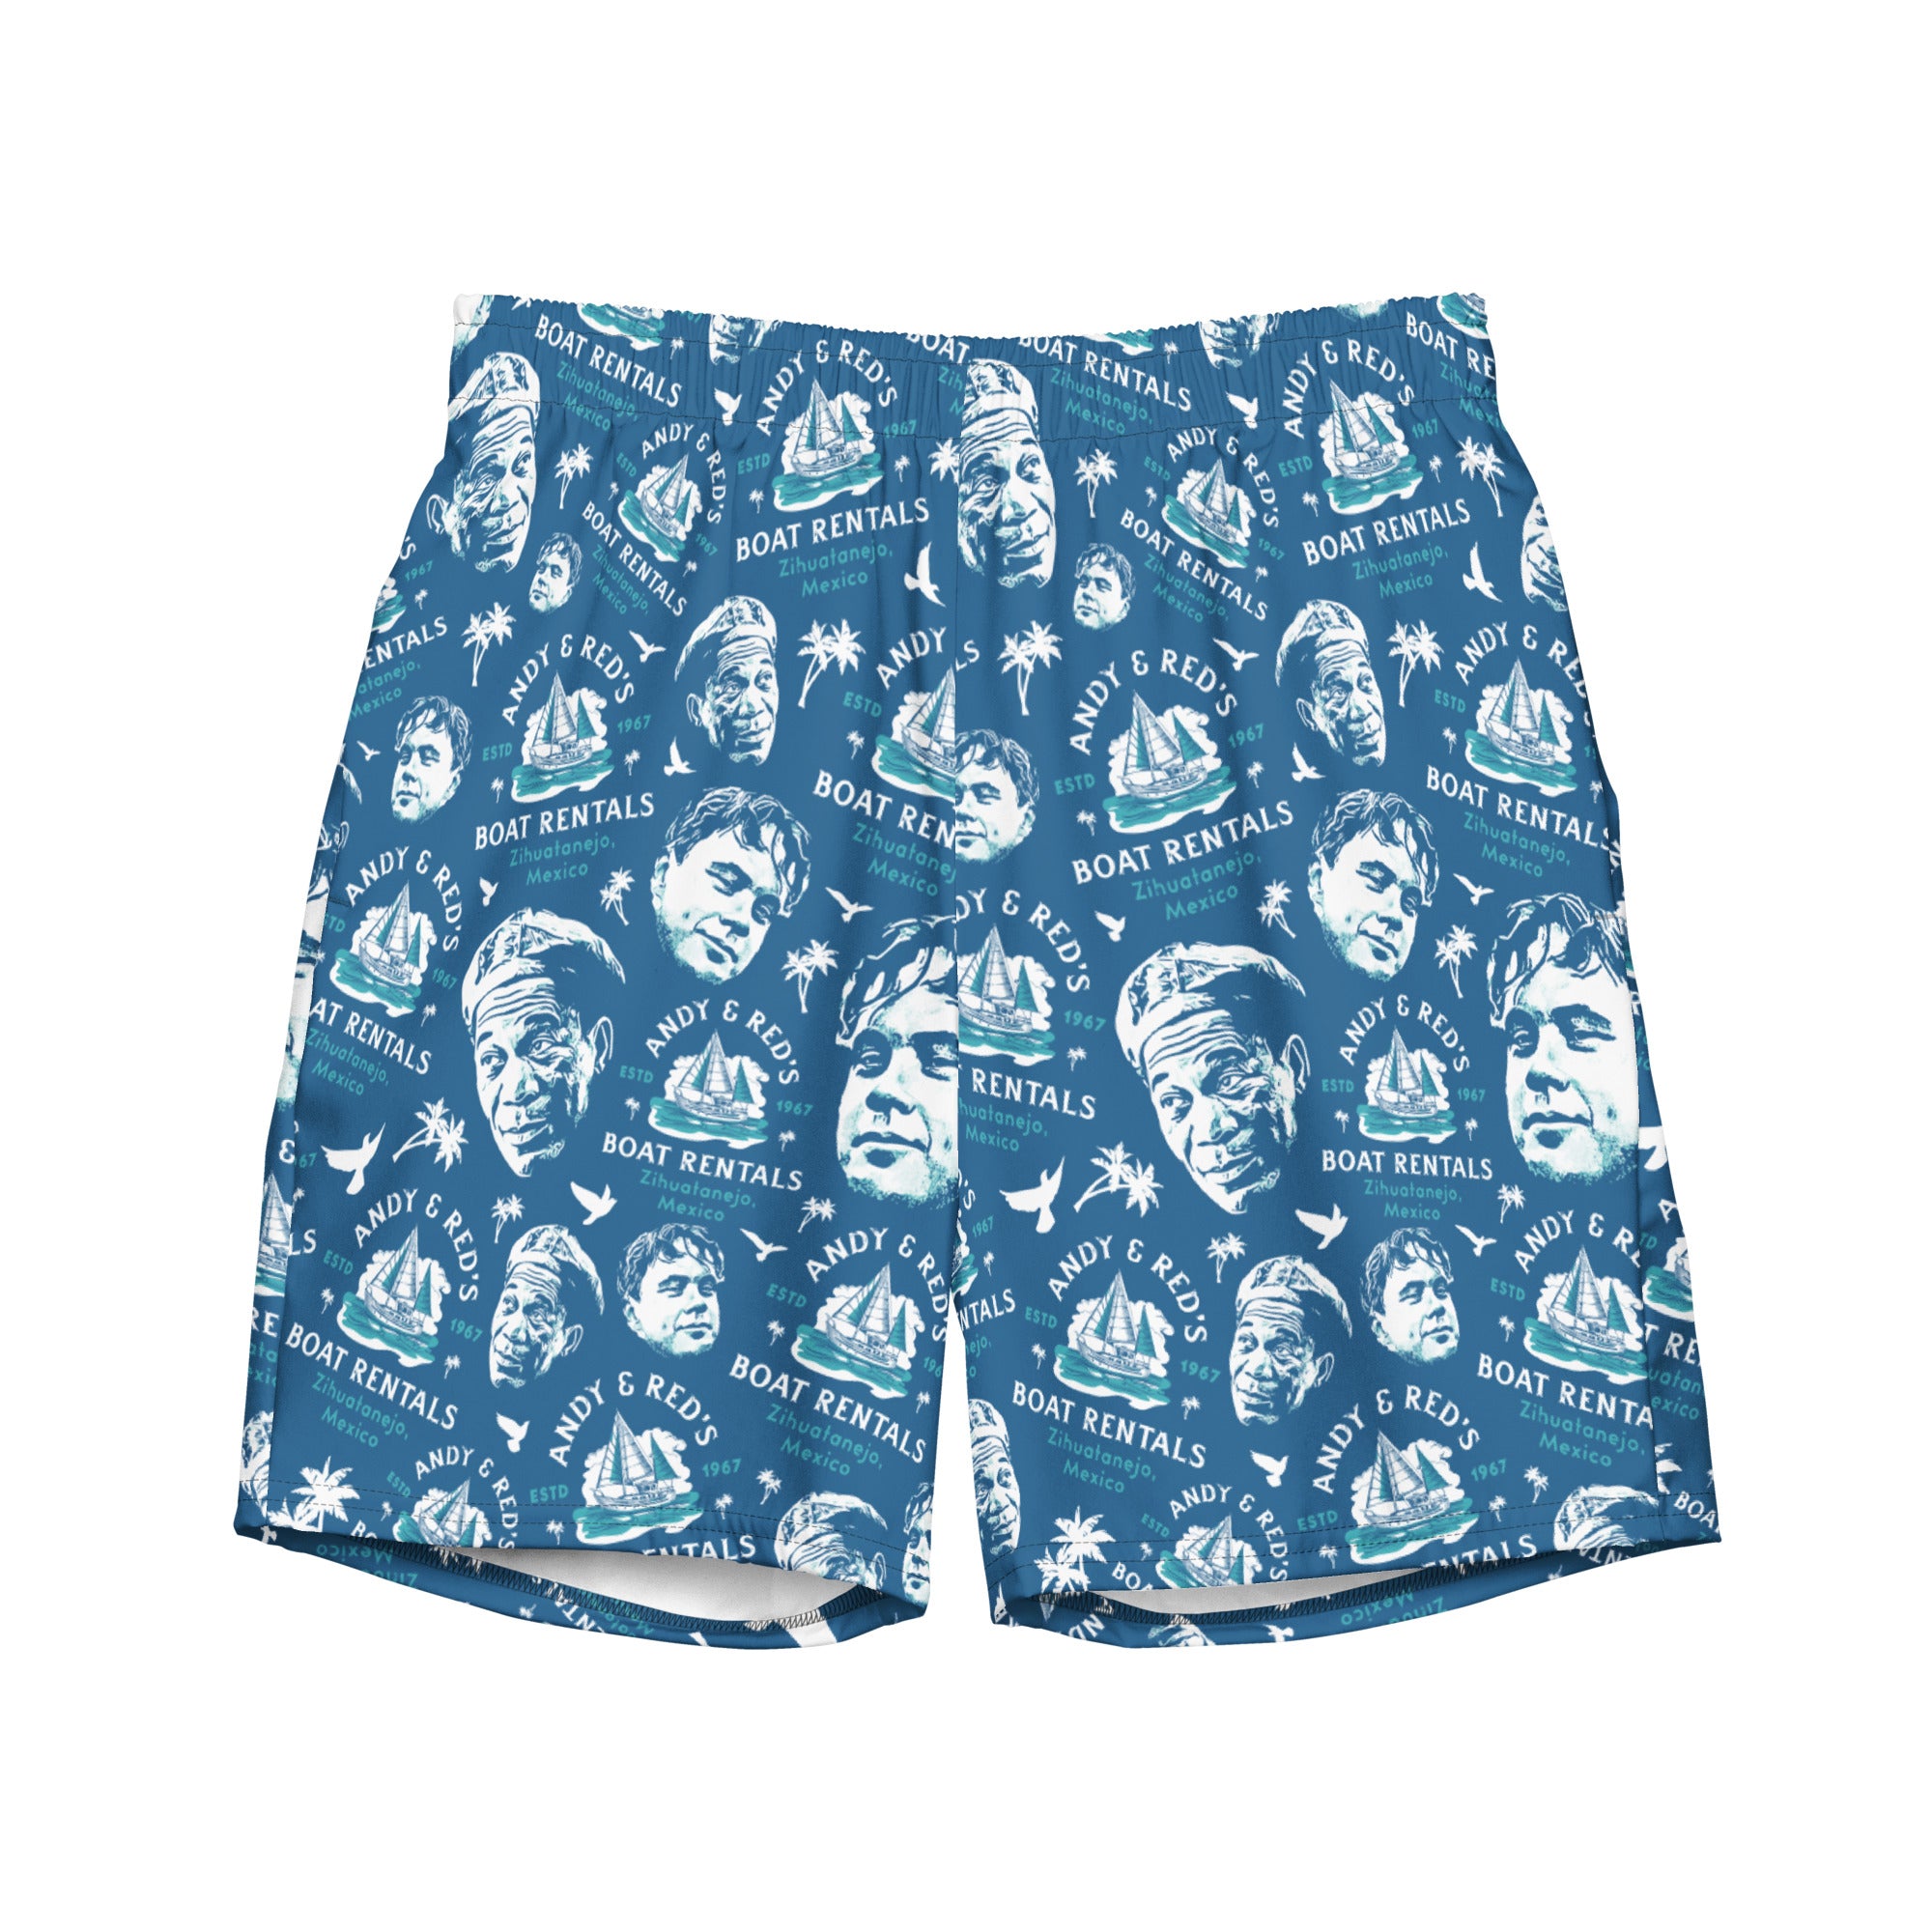 Andy & Red's Boat Rentals - Swim Trunks